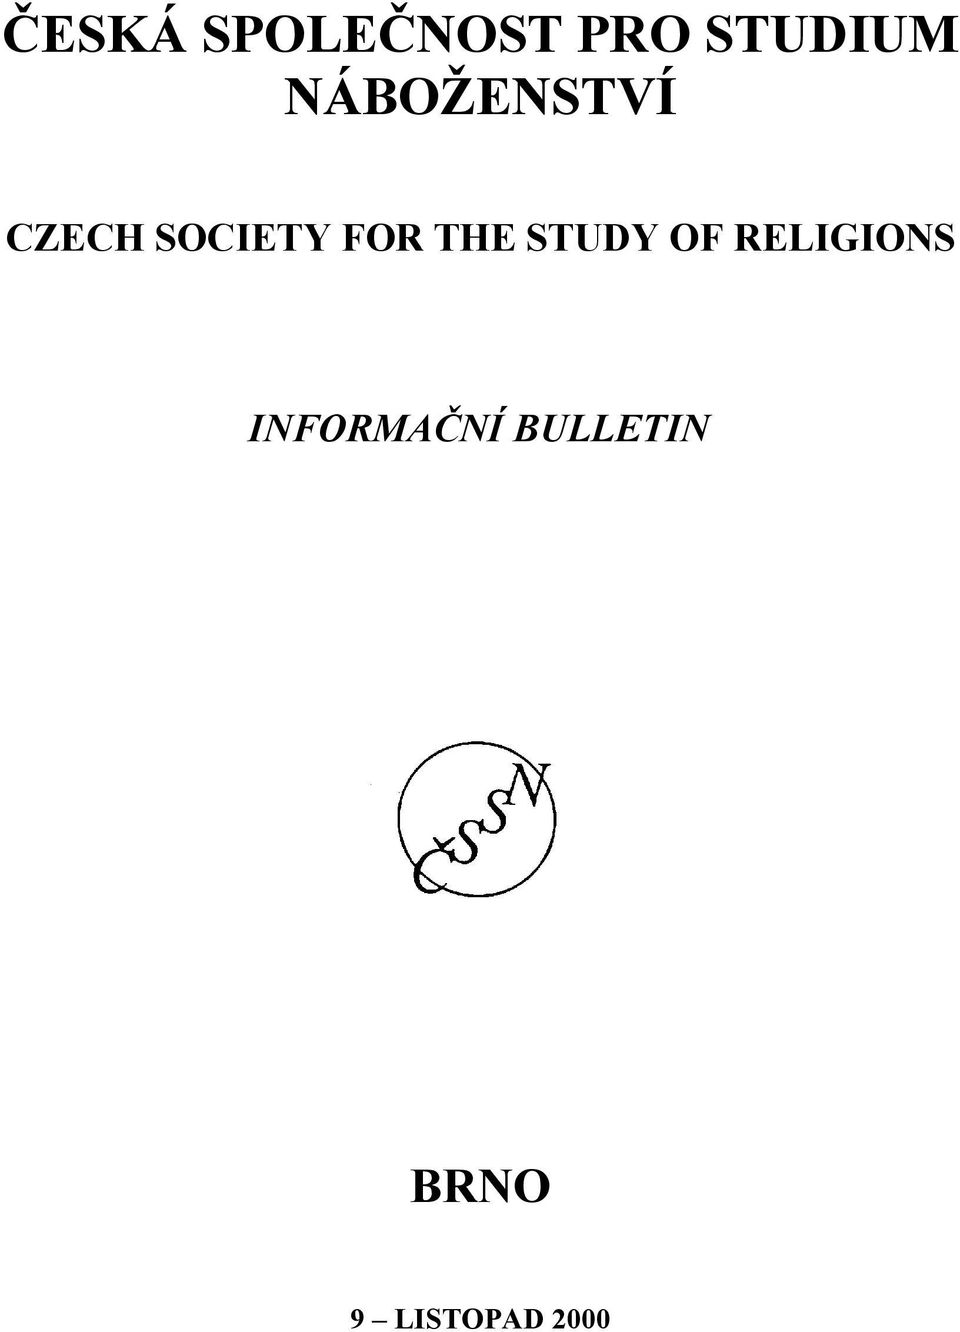 THE STUDY OF RELIGIONS